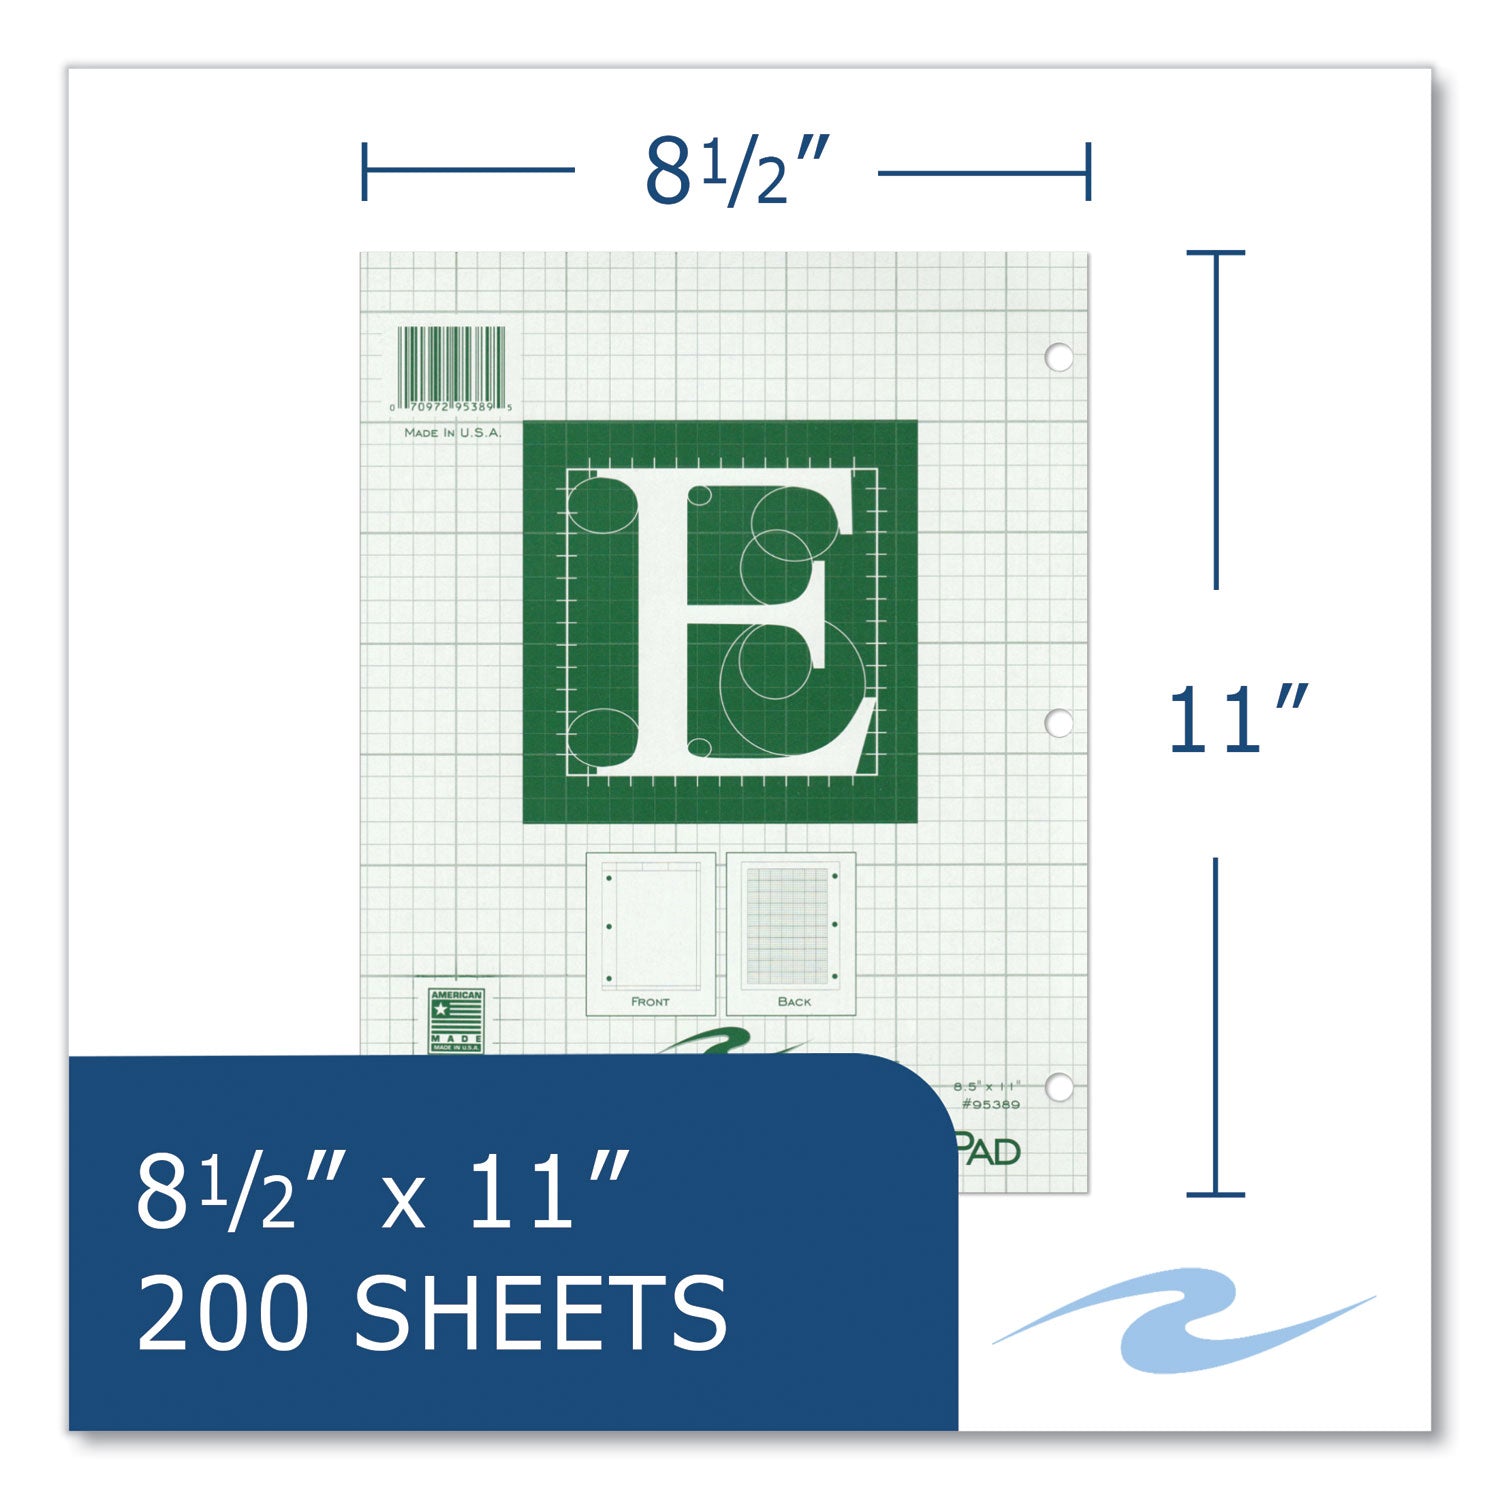 engineer-pad-05-margins-quad-rule-5-sq-in-1-sq-in-200-lt-green-85x11-sheets-pad-12-ct-ships-in-4-6-business-days_roa95389cs - 8